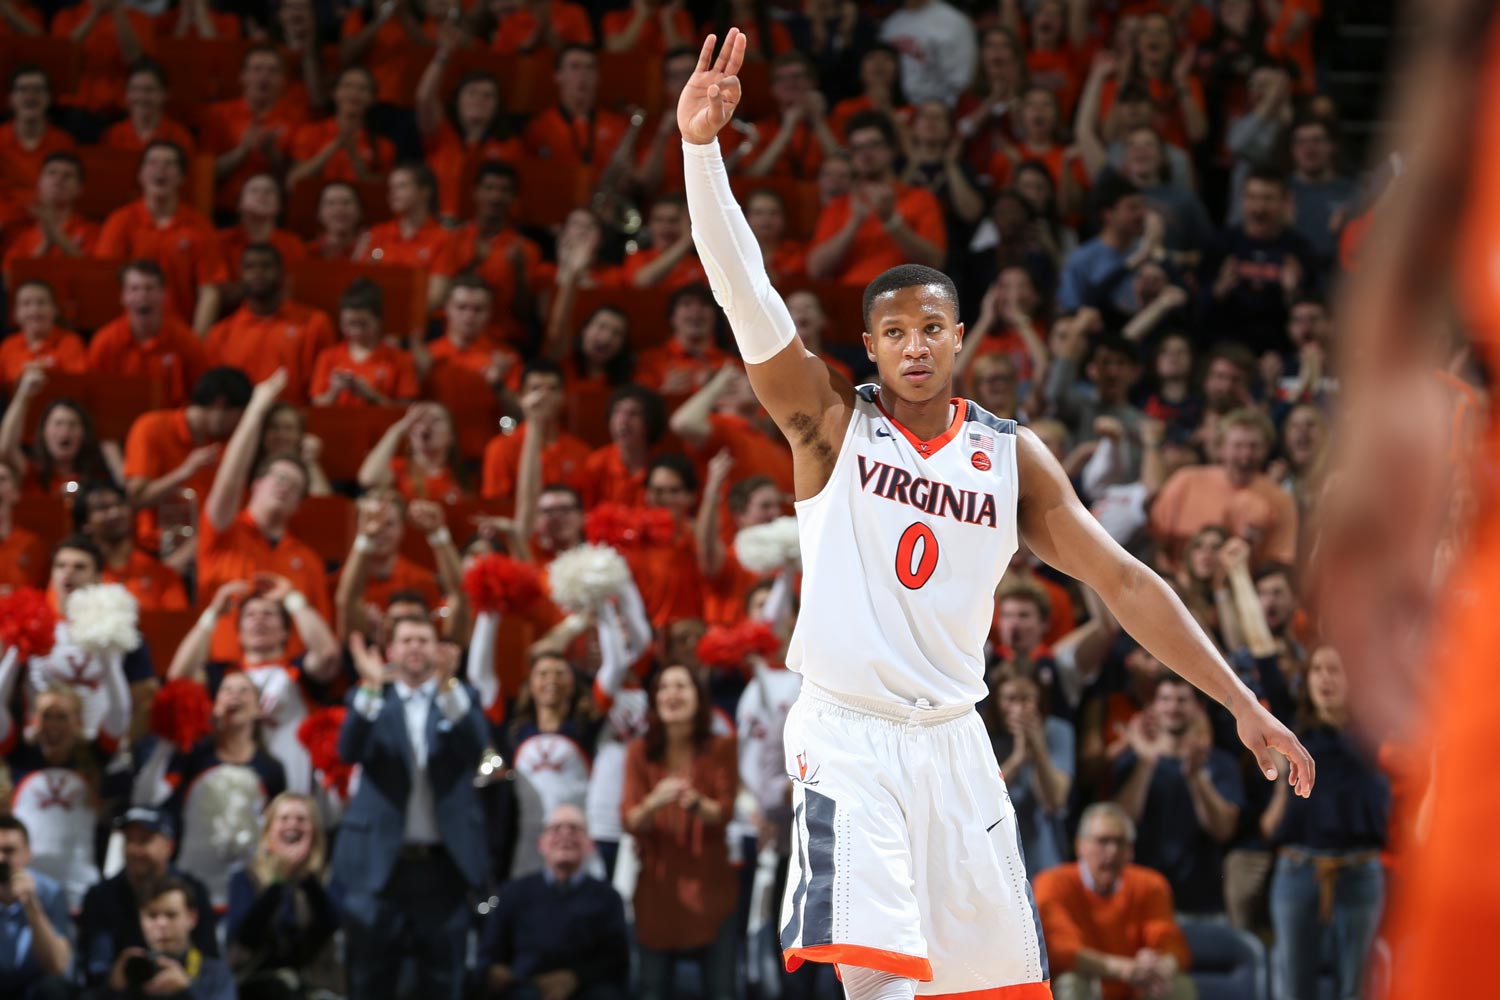 Devon Hall holds up three fingers during a basketball game